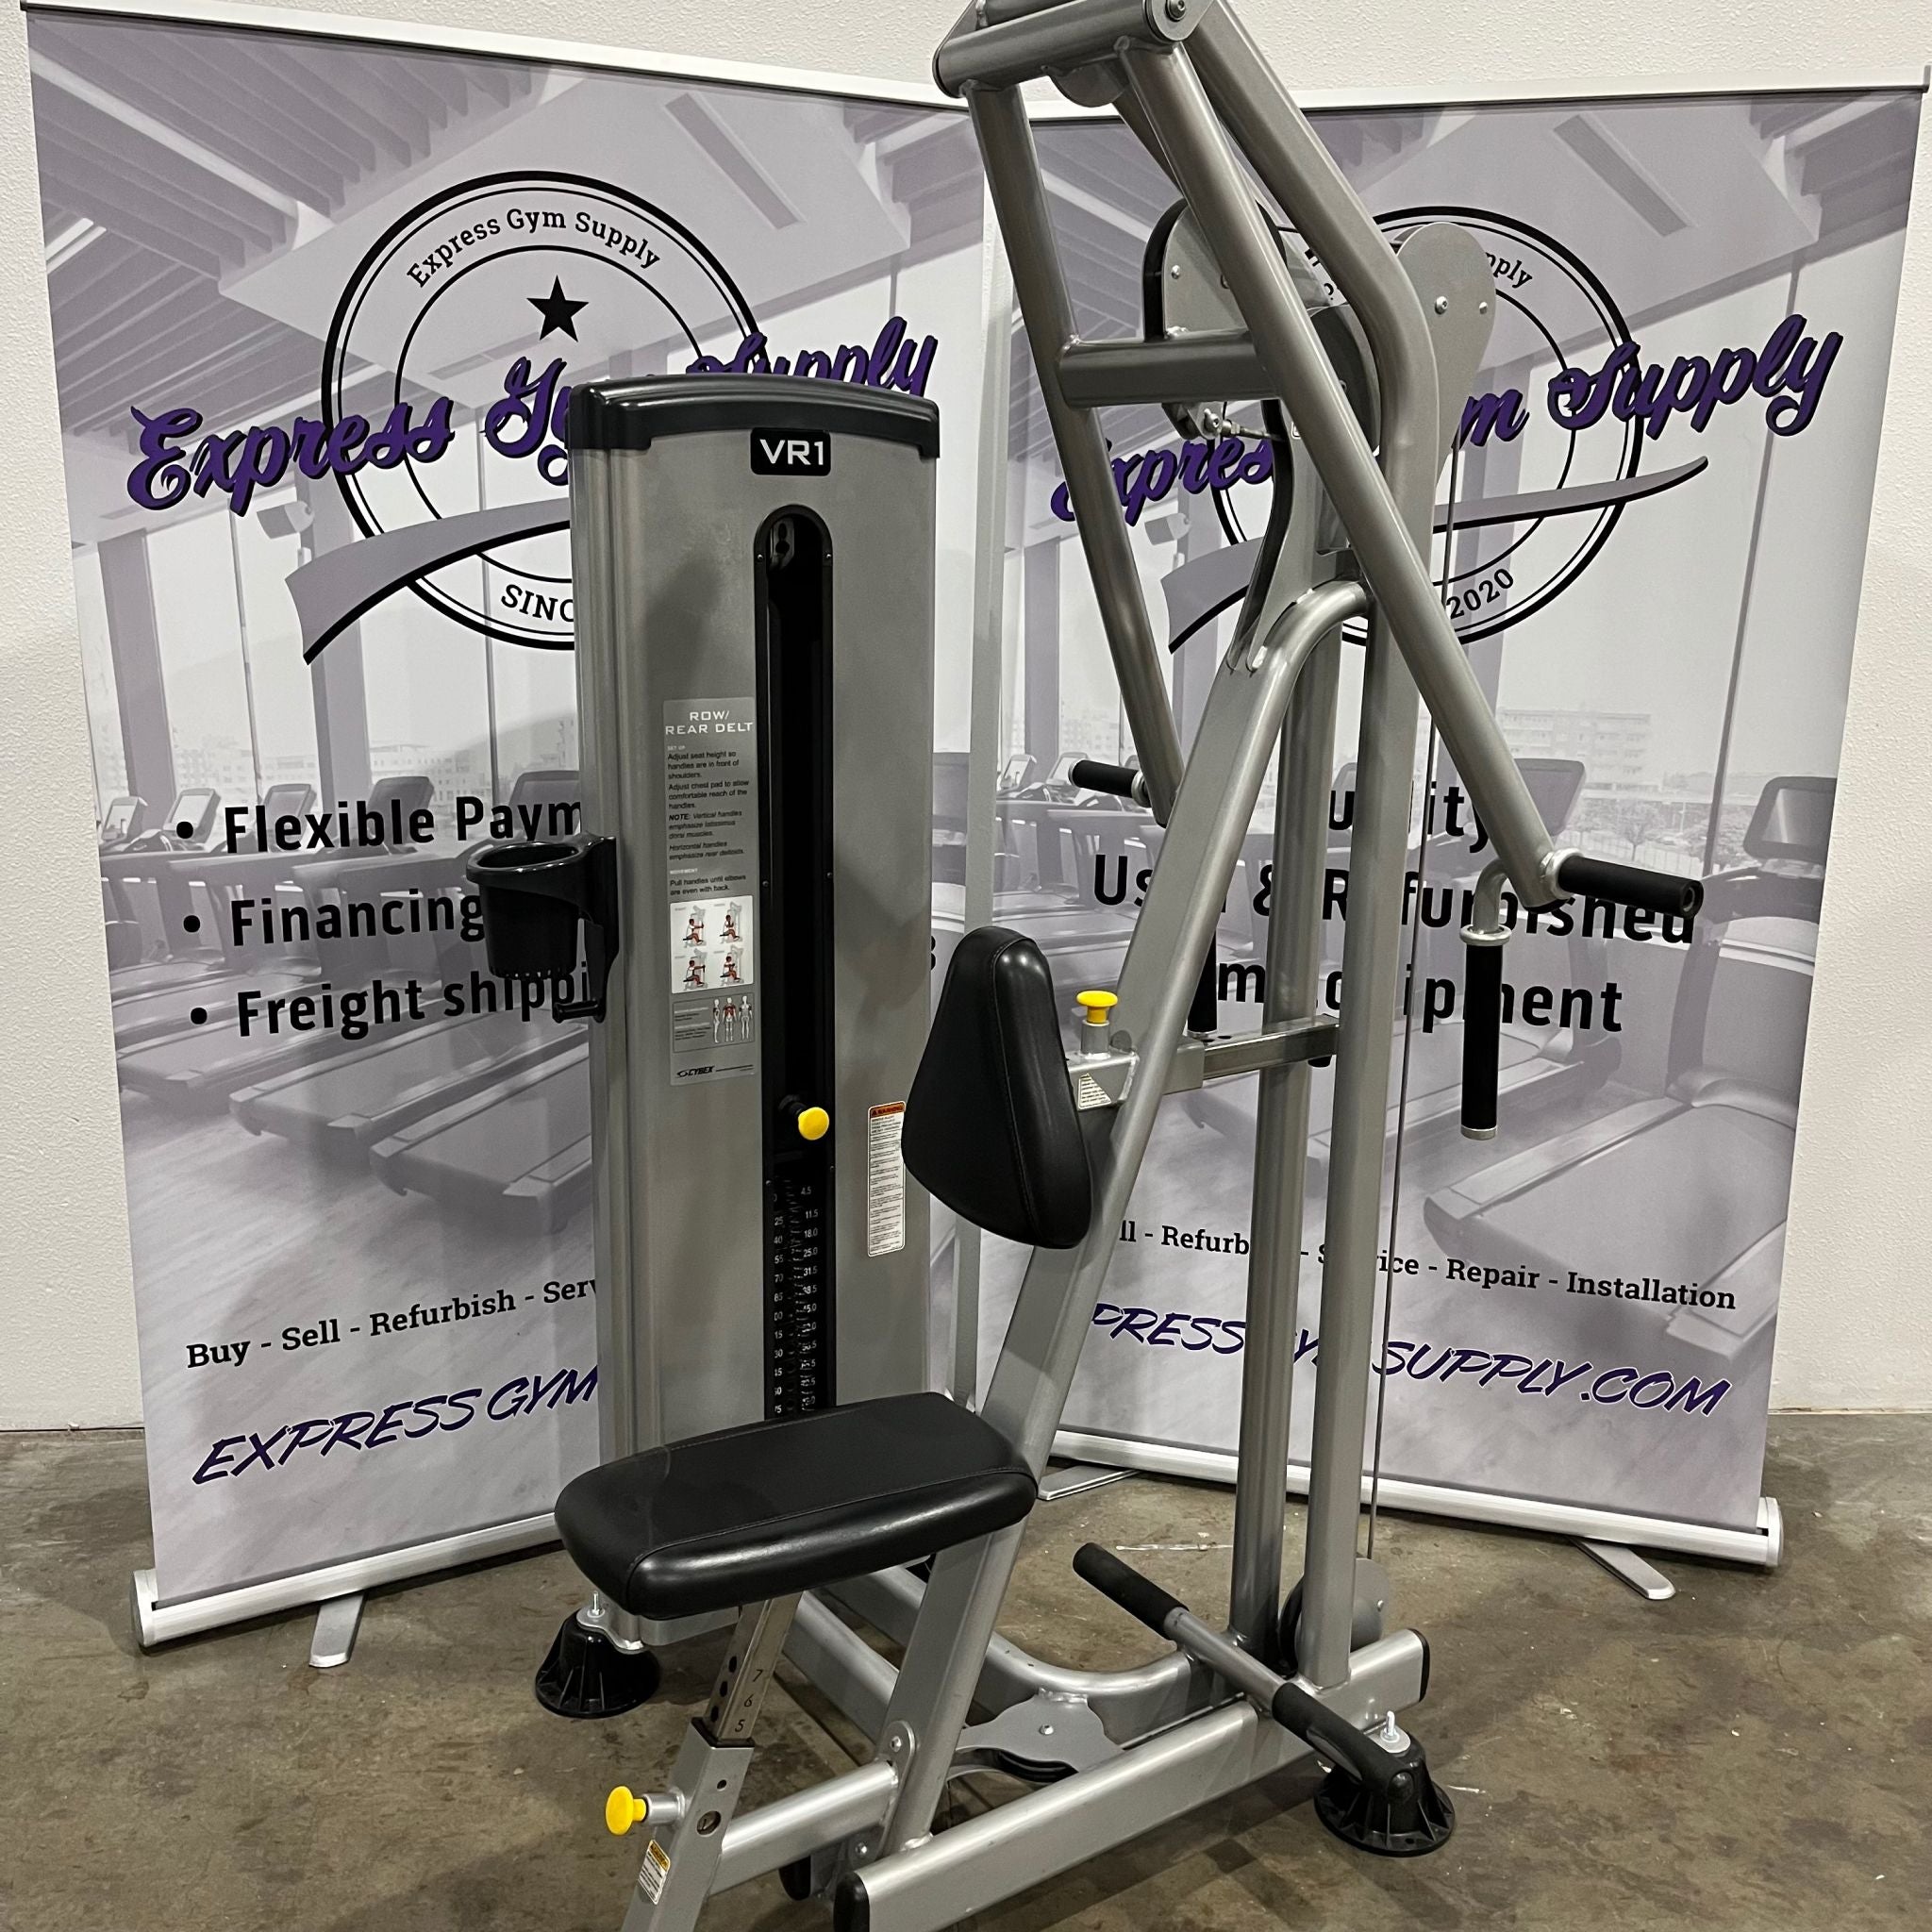 Front right view of the Cybex VR1 Row and Rear Delt Machine in Warehouse, Silver with black trim